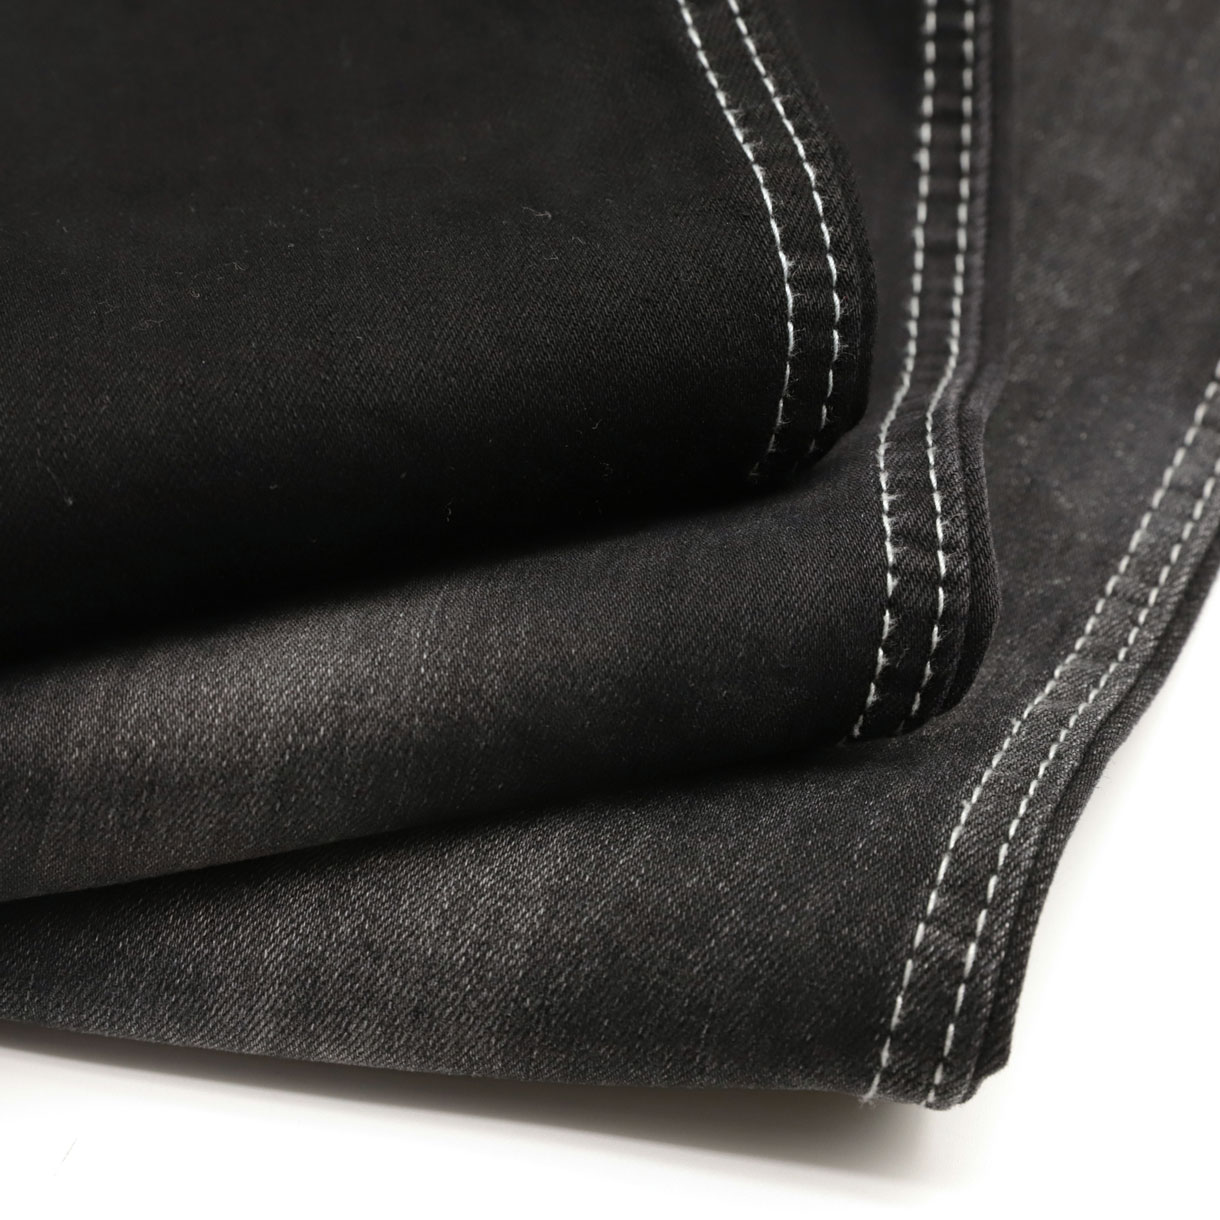 Cotton Denim Fabric: the Best Fabric for Your next Project 1